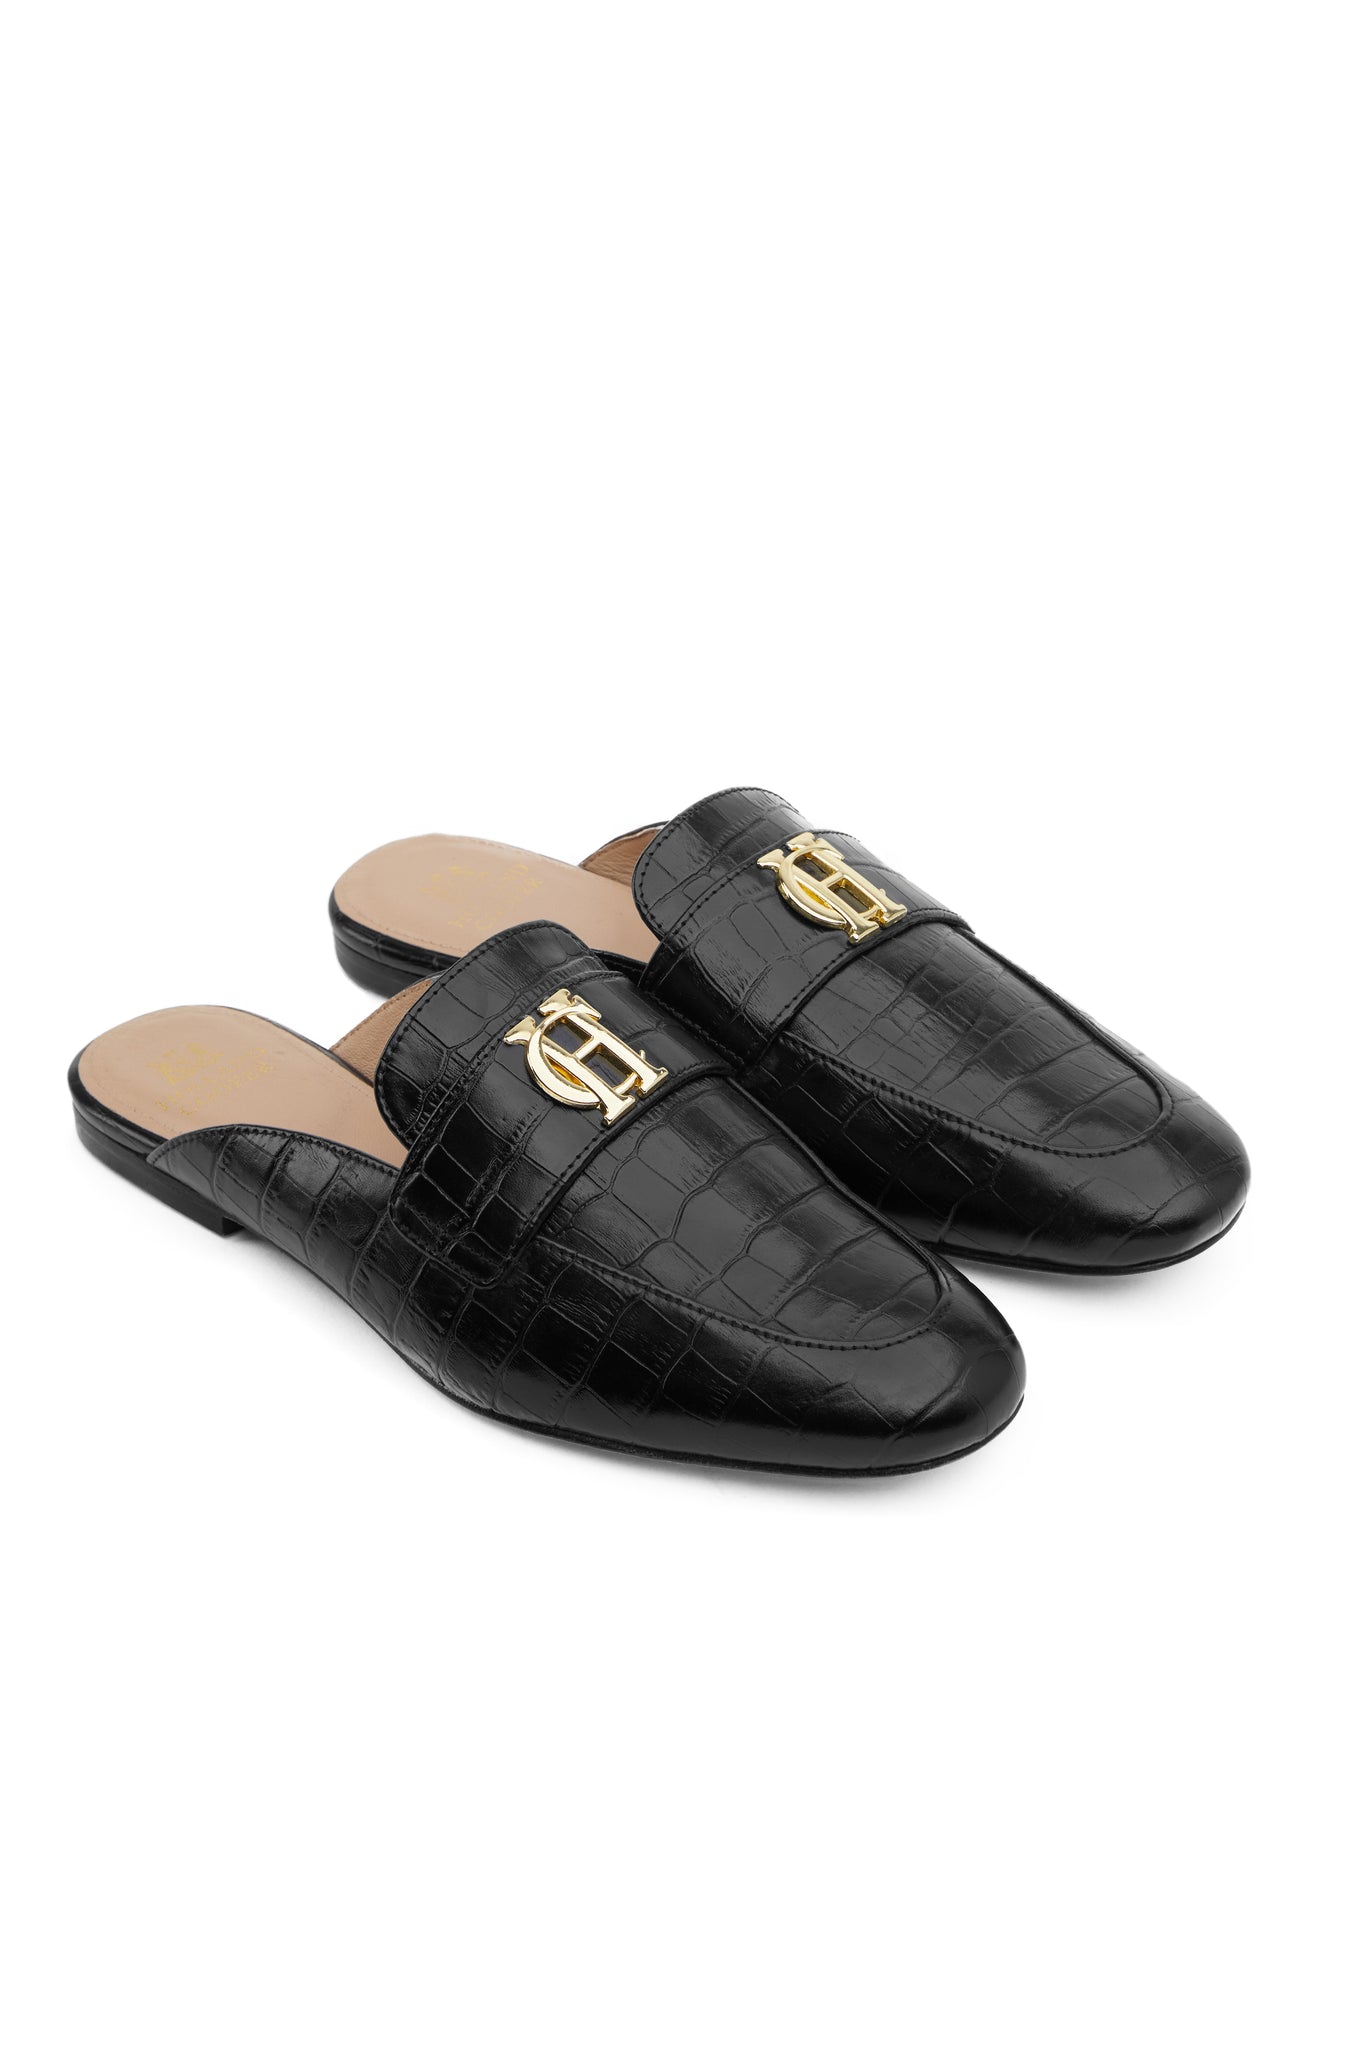 Black croc embossed leather backless loafers with a slightly pointed toe and gold hardware to the top